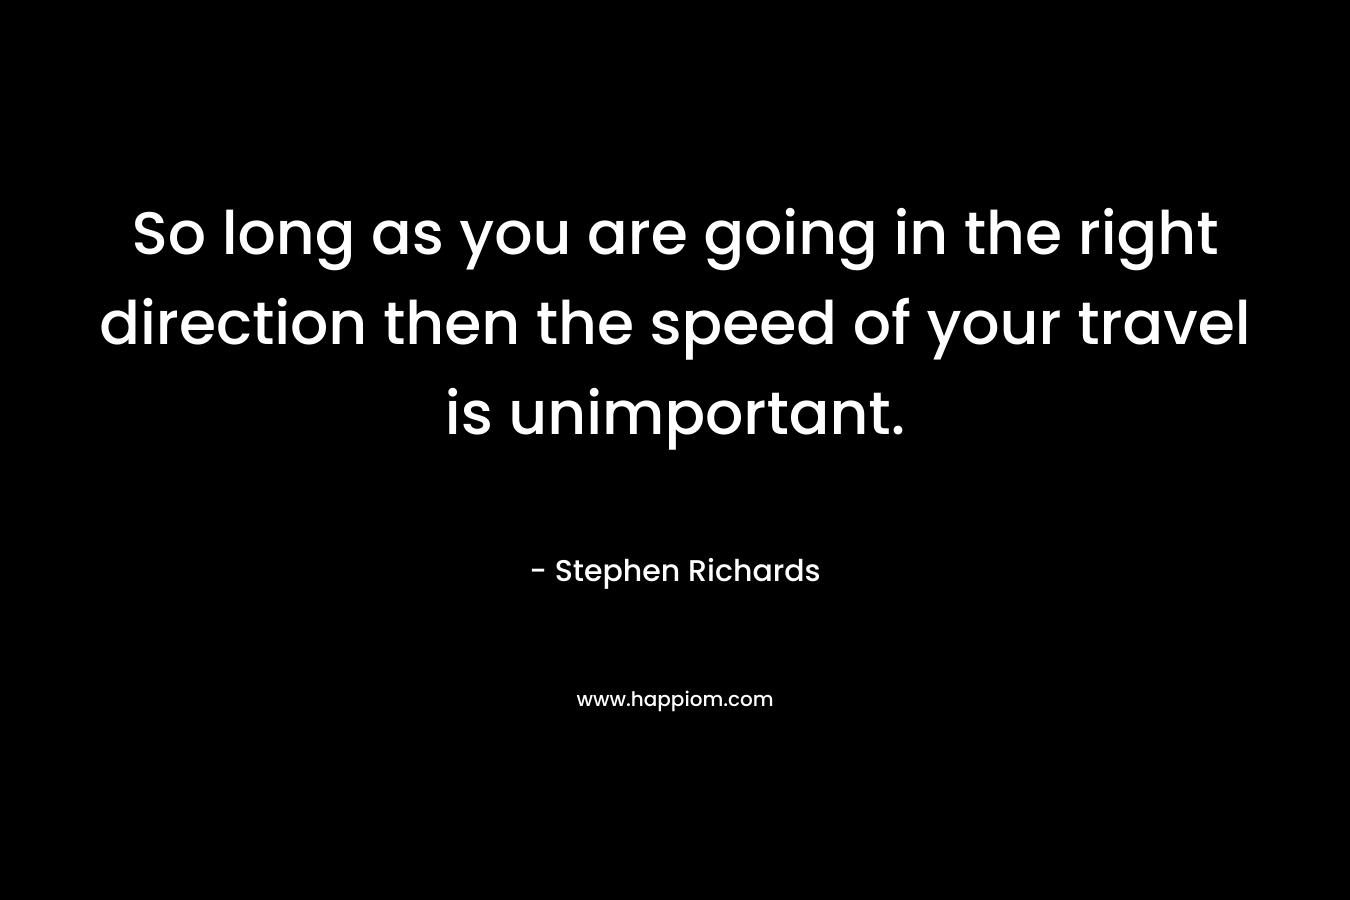 So long as you are going in the right direction then the speed of your travel is unimportant. – Stephen Richards